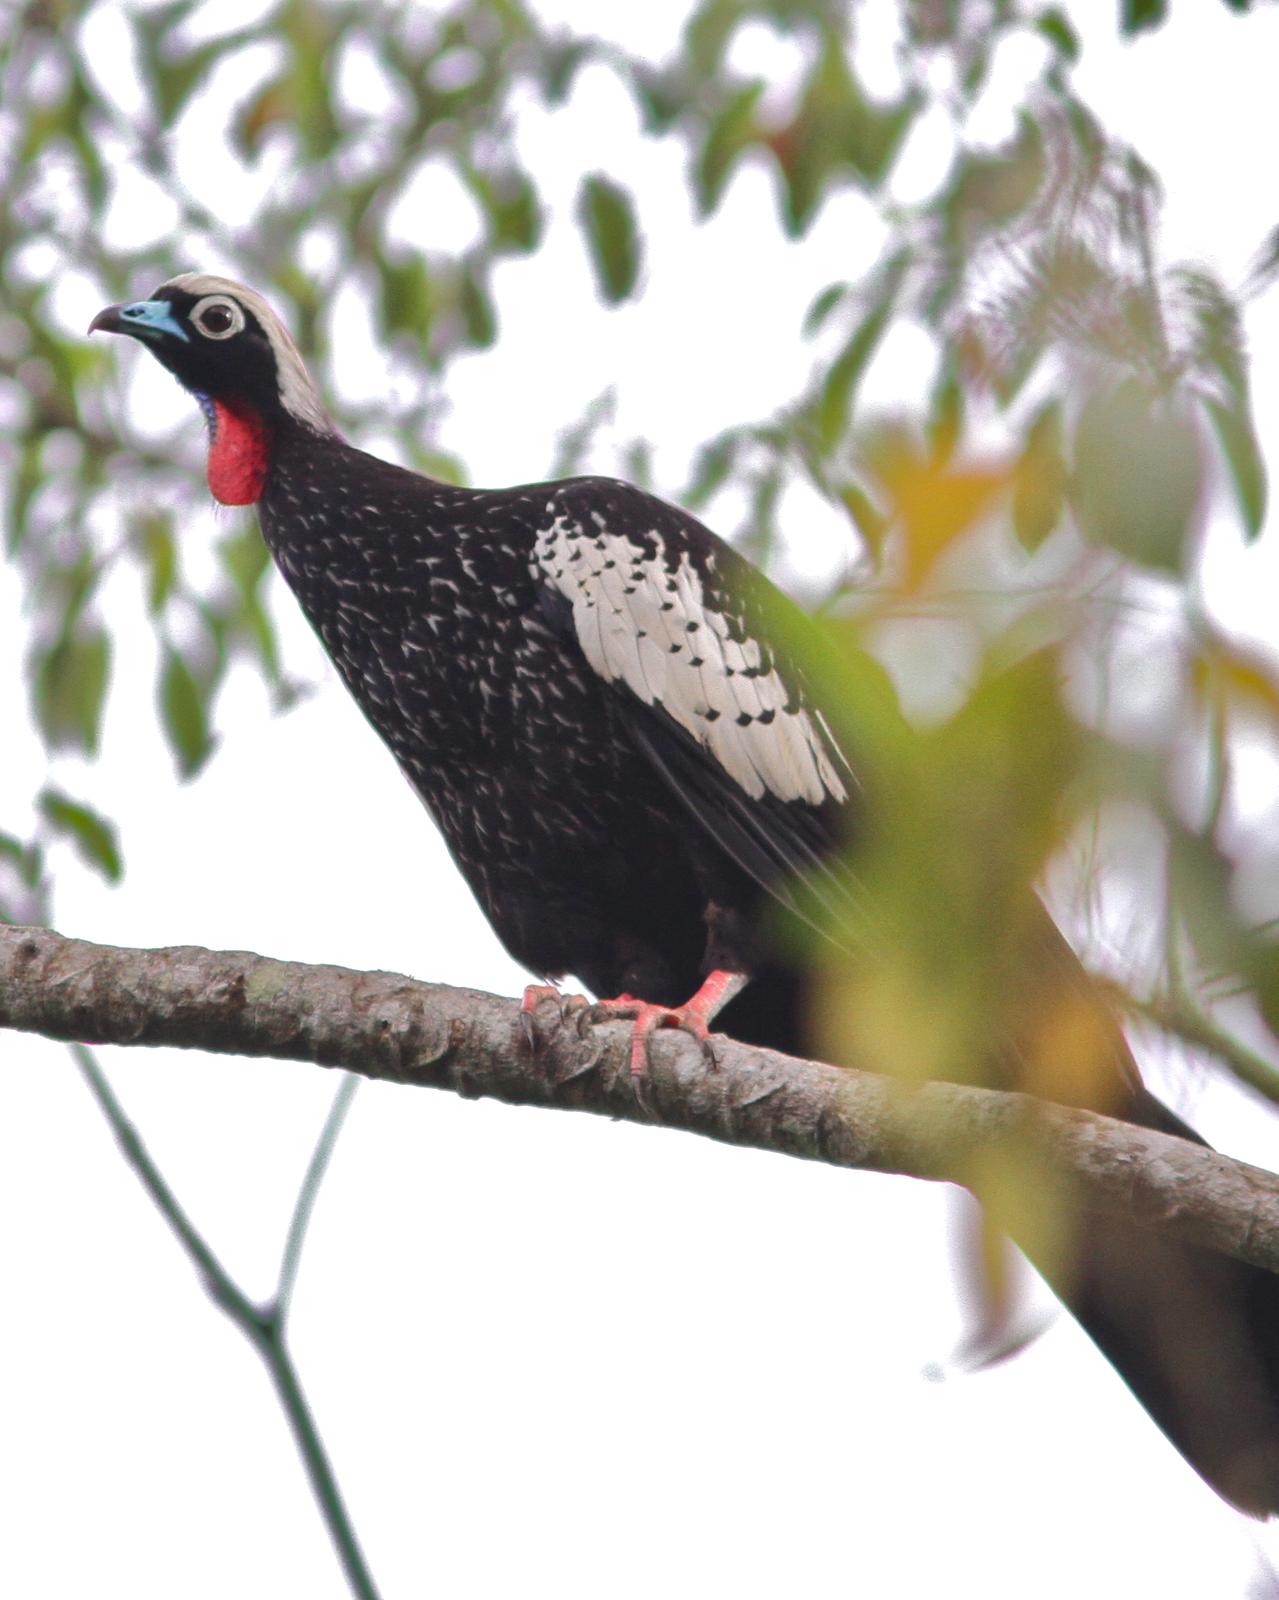 Black-fronted Piping-Guan Photo by Marcelo Padua